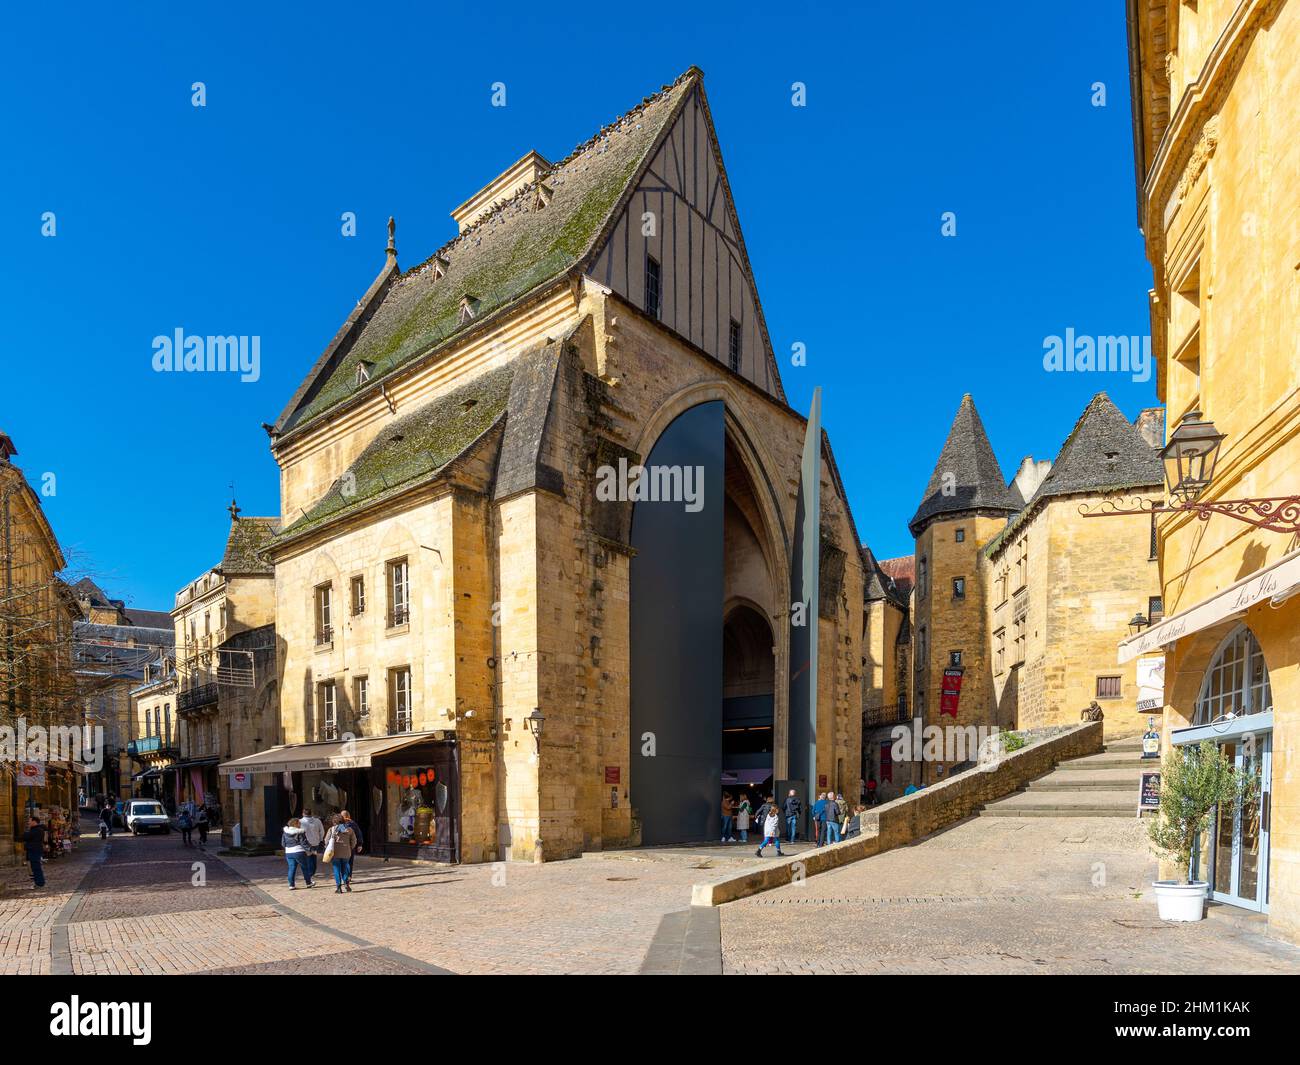 Sarlat-la-Caneda, France - November 1, 2021: The market hall of a a beautiful french yellow stone town located in Perigord, France, taken on a sunny a Stock Photo